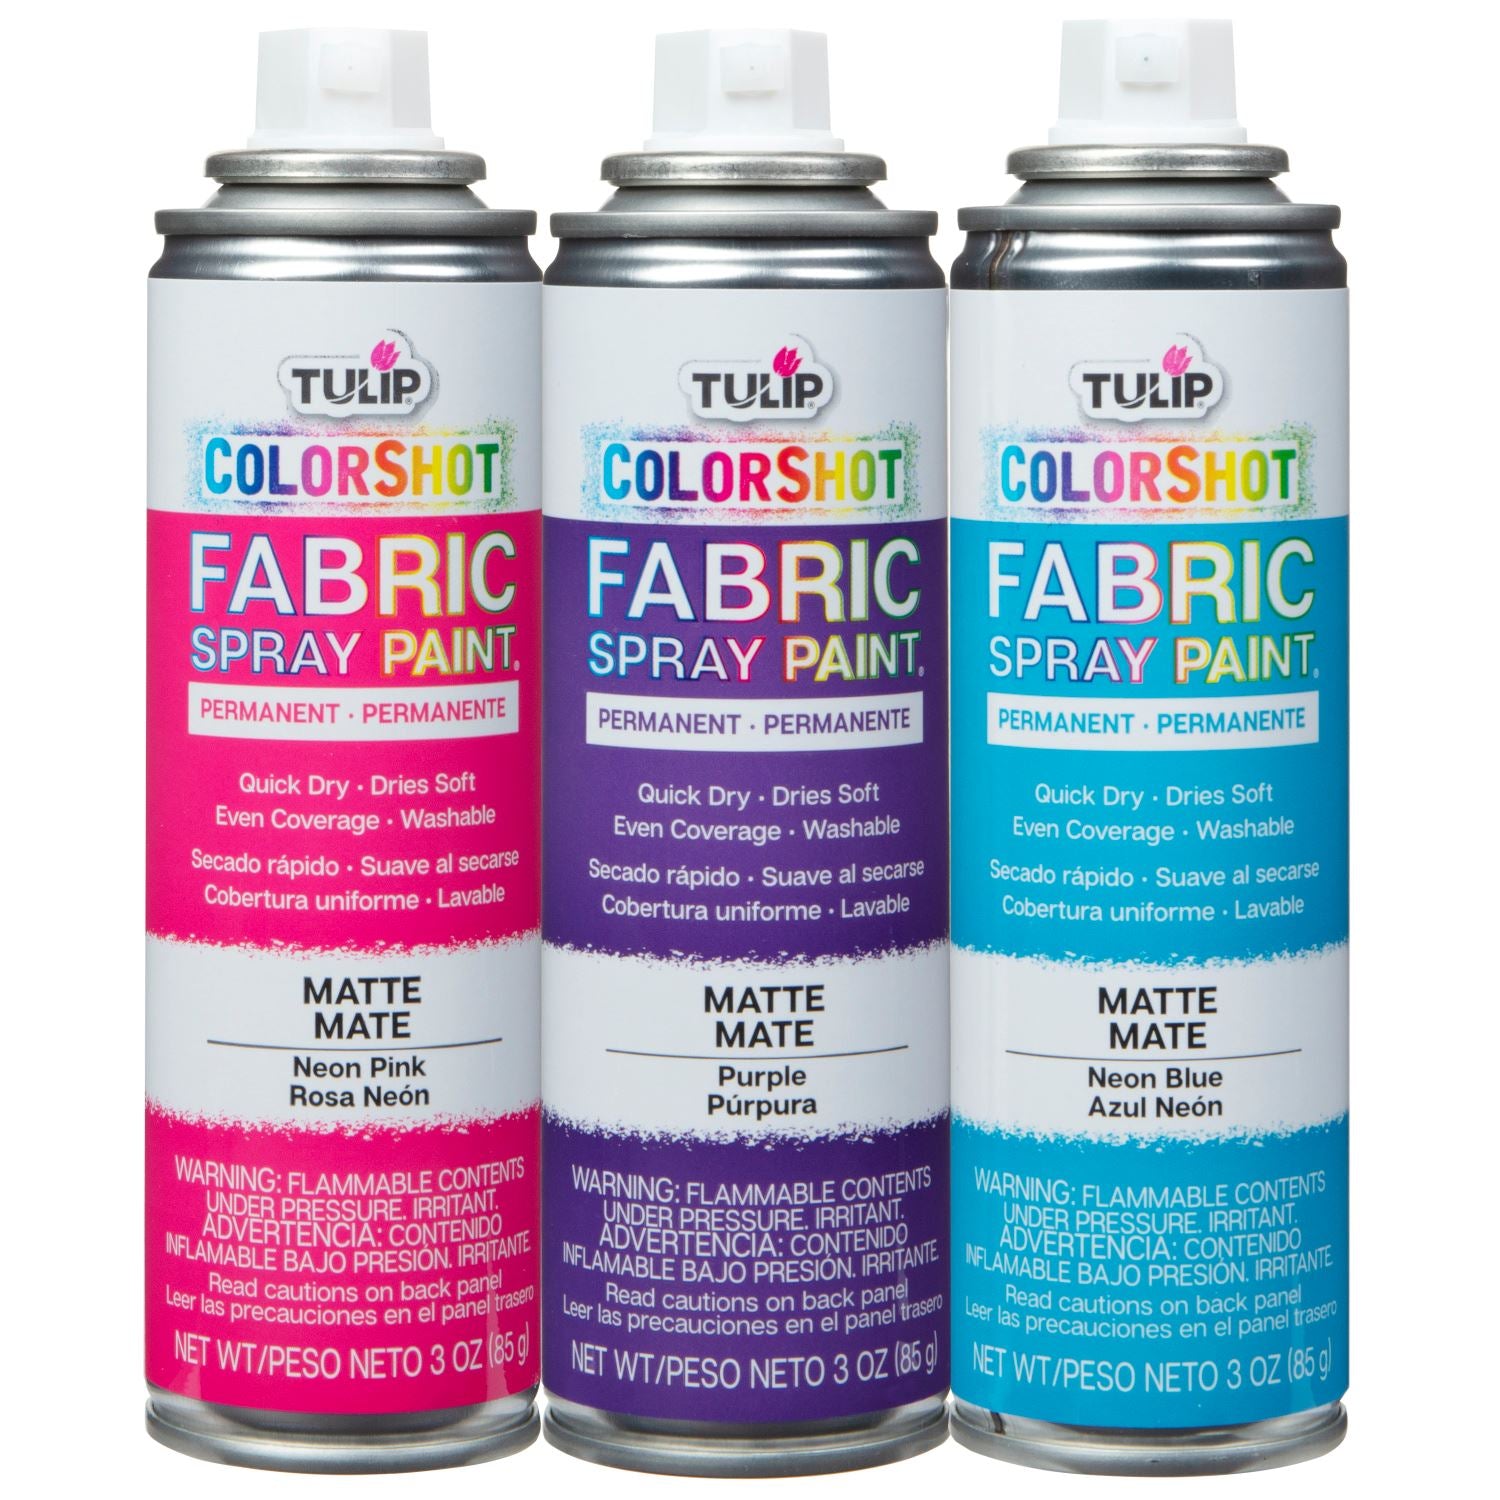 How to Use Tulip Instant Fabric Spray Paint - Product Review 